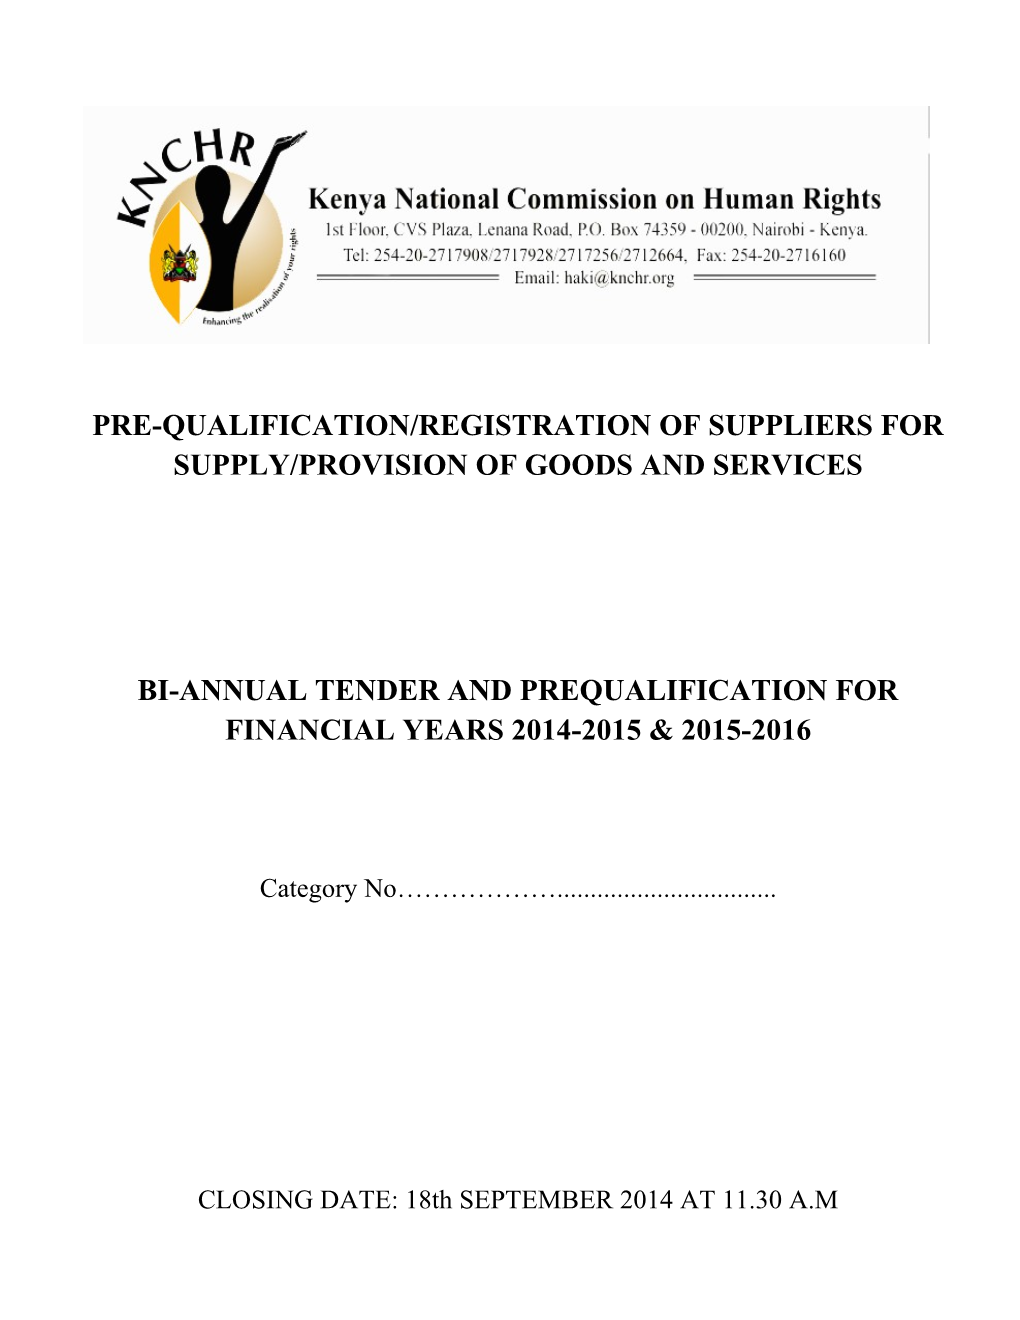 Pre-Qualification/Registration of Suppliers for Supply/Provision of Goods and Services